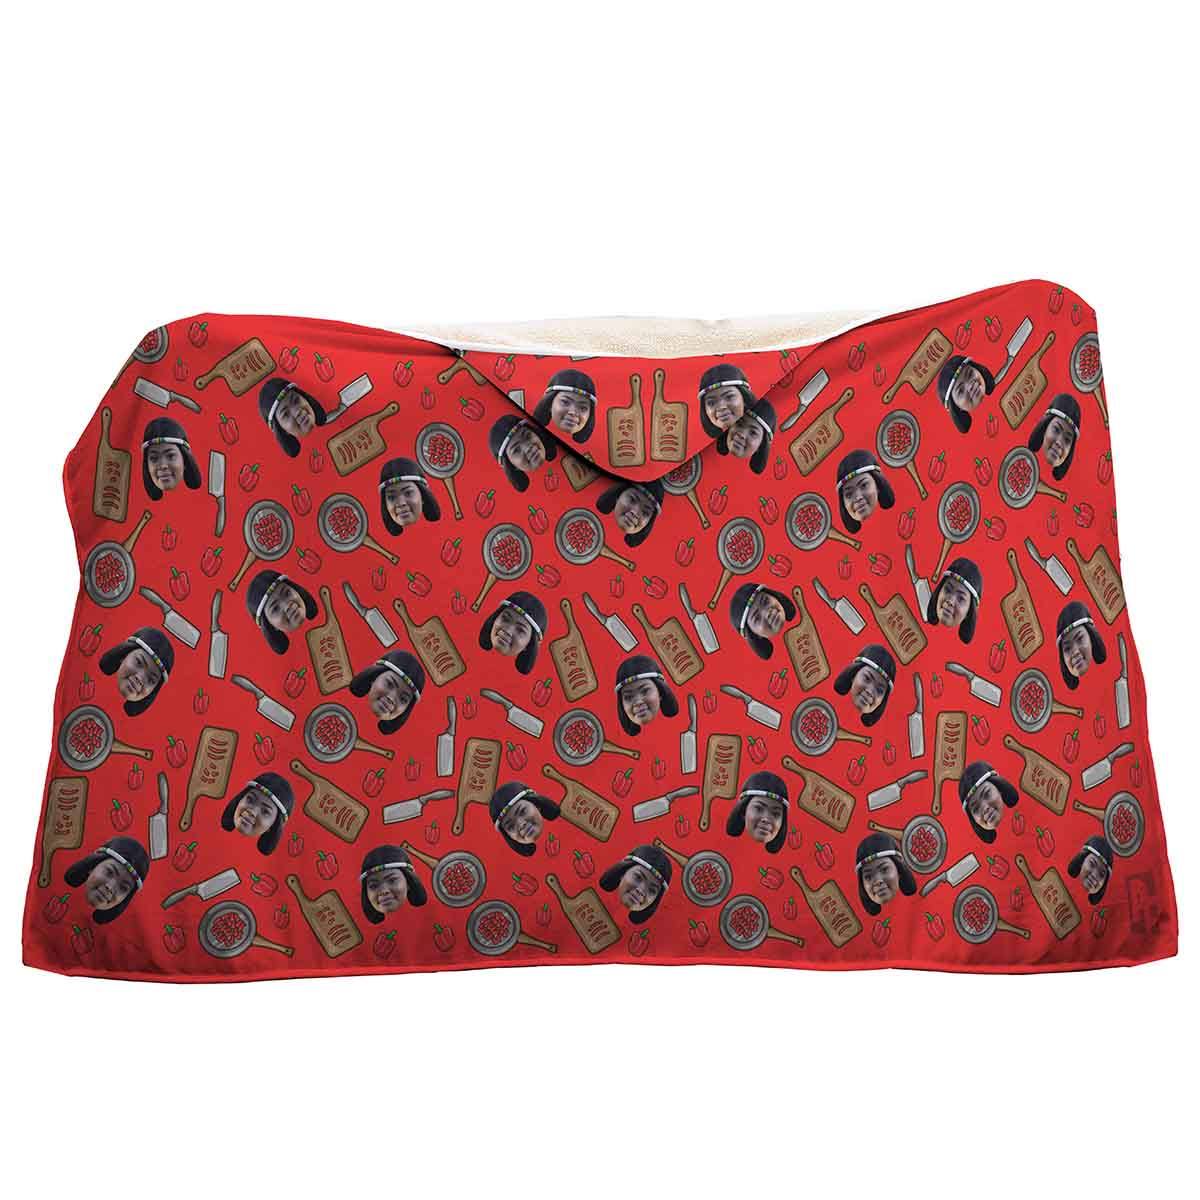 red Сooking hooded blanket personalized with photo of face printed on it